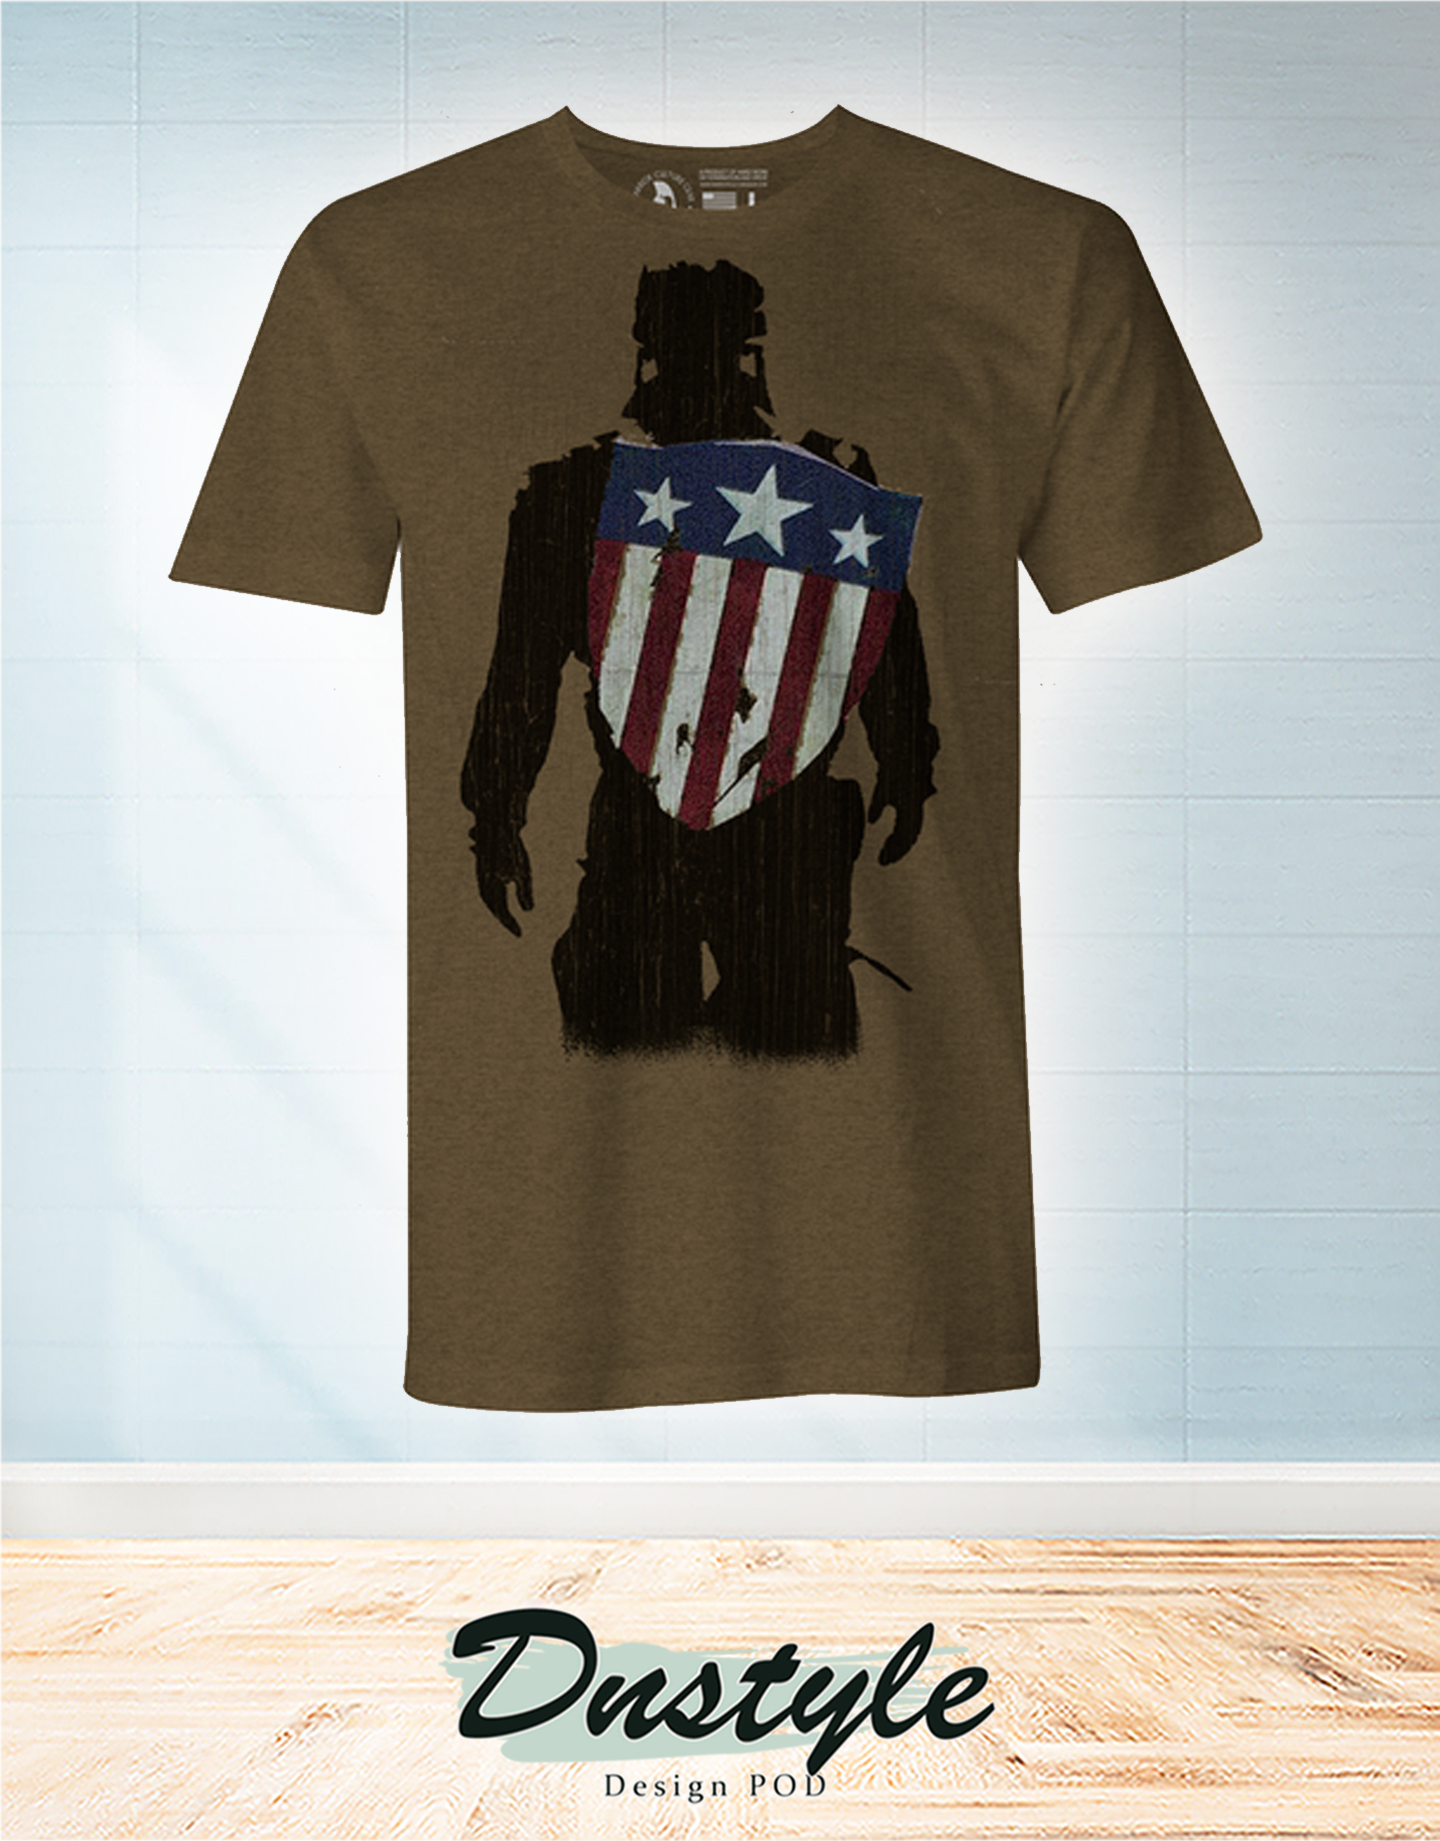 Captain America for as long as I can remember I just wanted to do what was right t-shirt